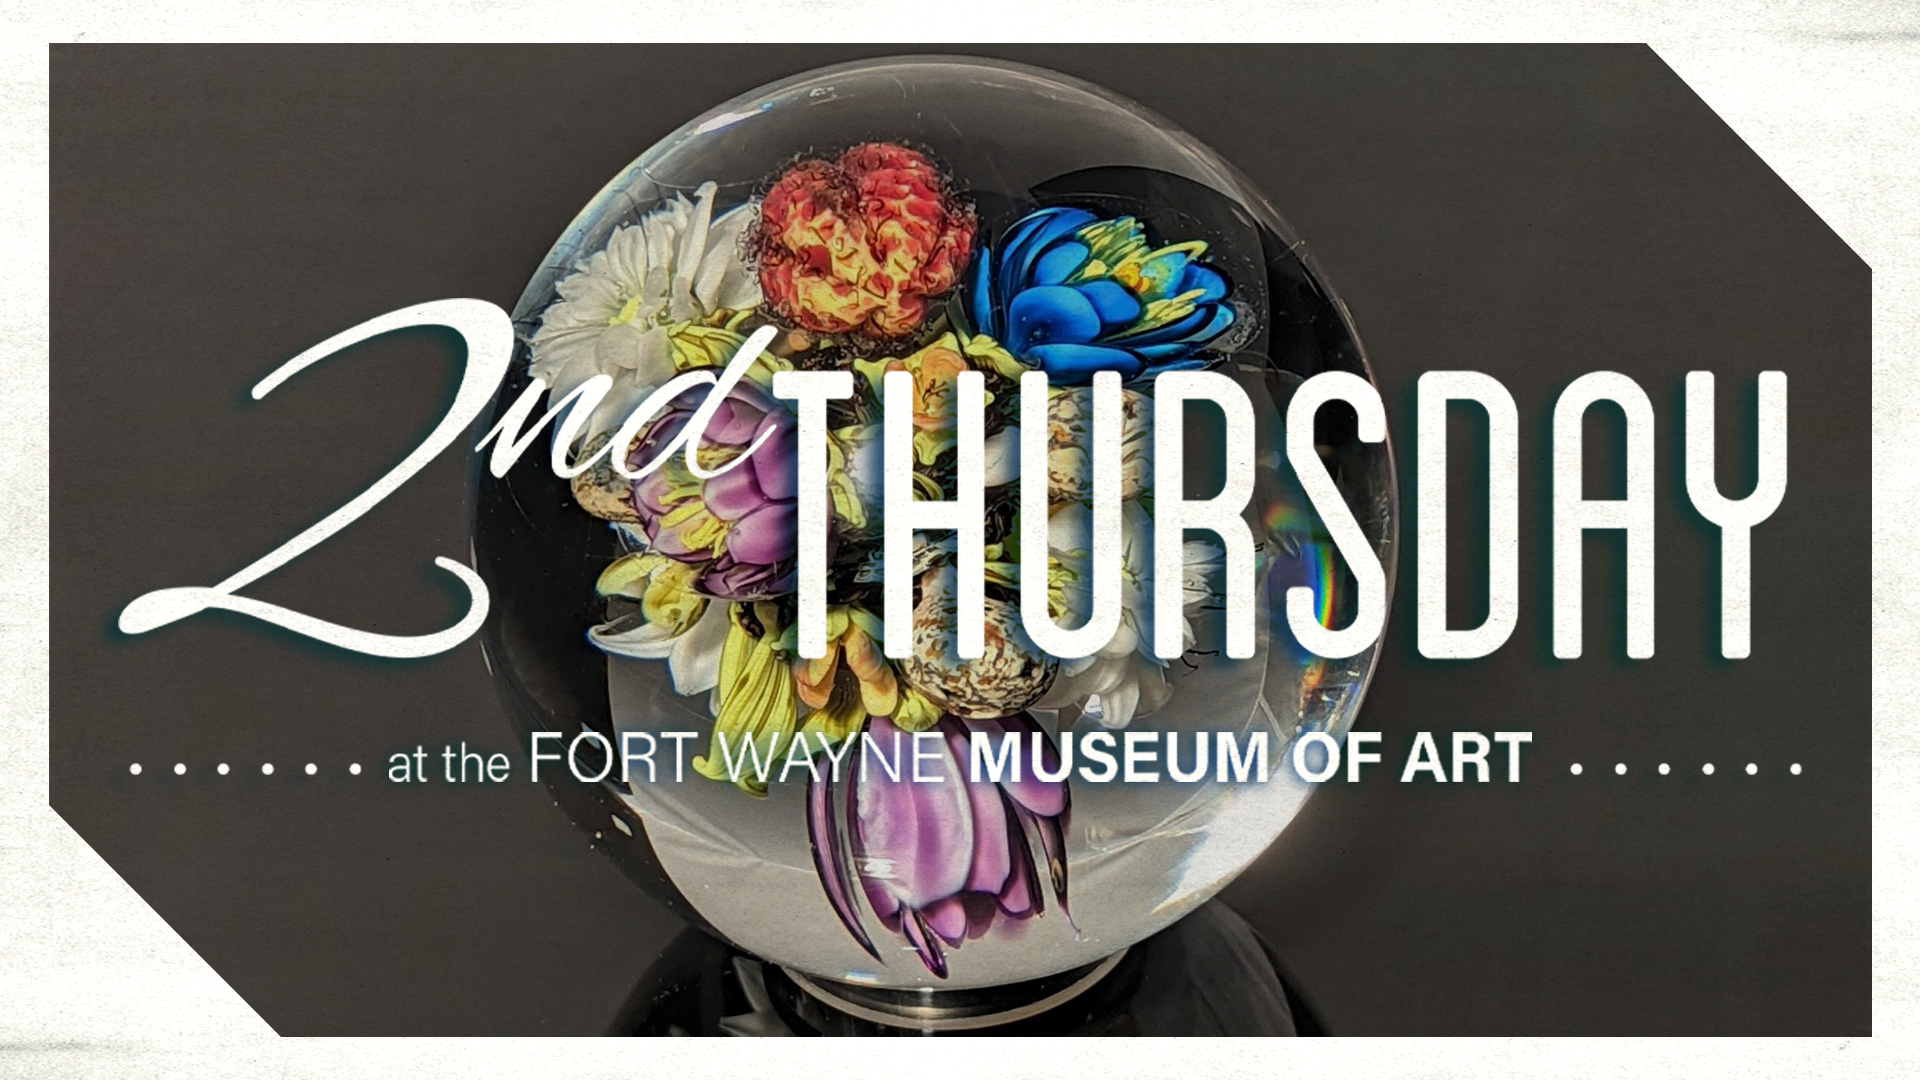 2nd Thursday at the Fort Wayne Museum of Art: Recent Acquisitions with Charles Shepard